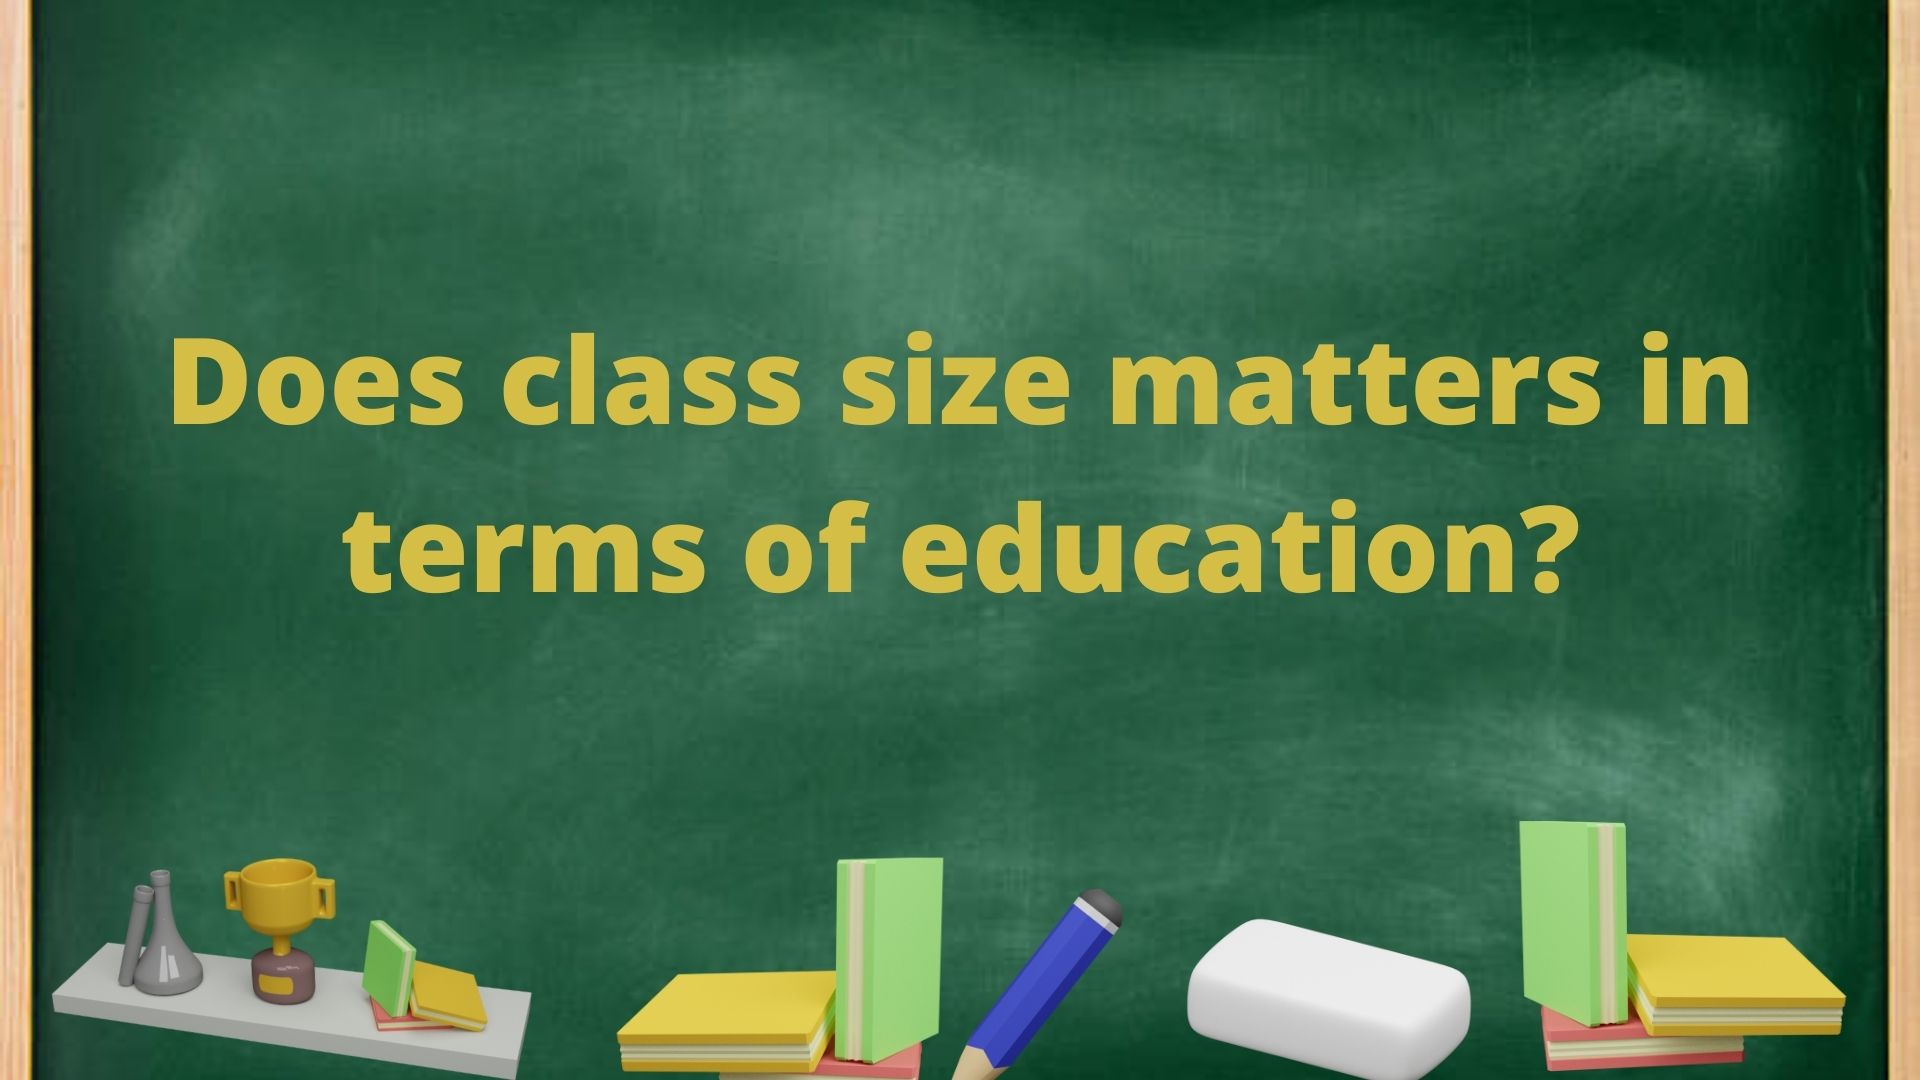 Does class size matters in terms of education?